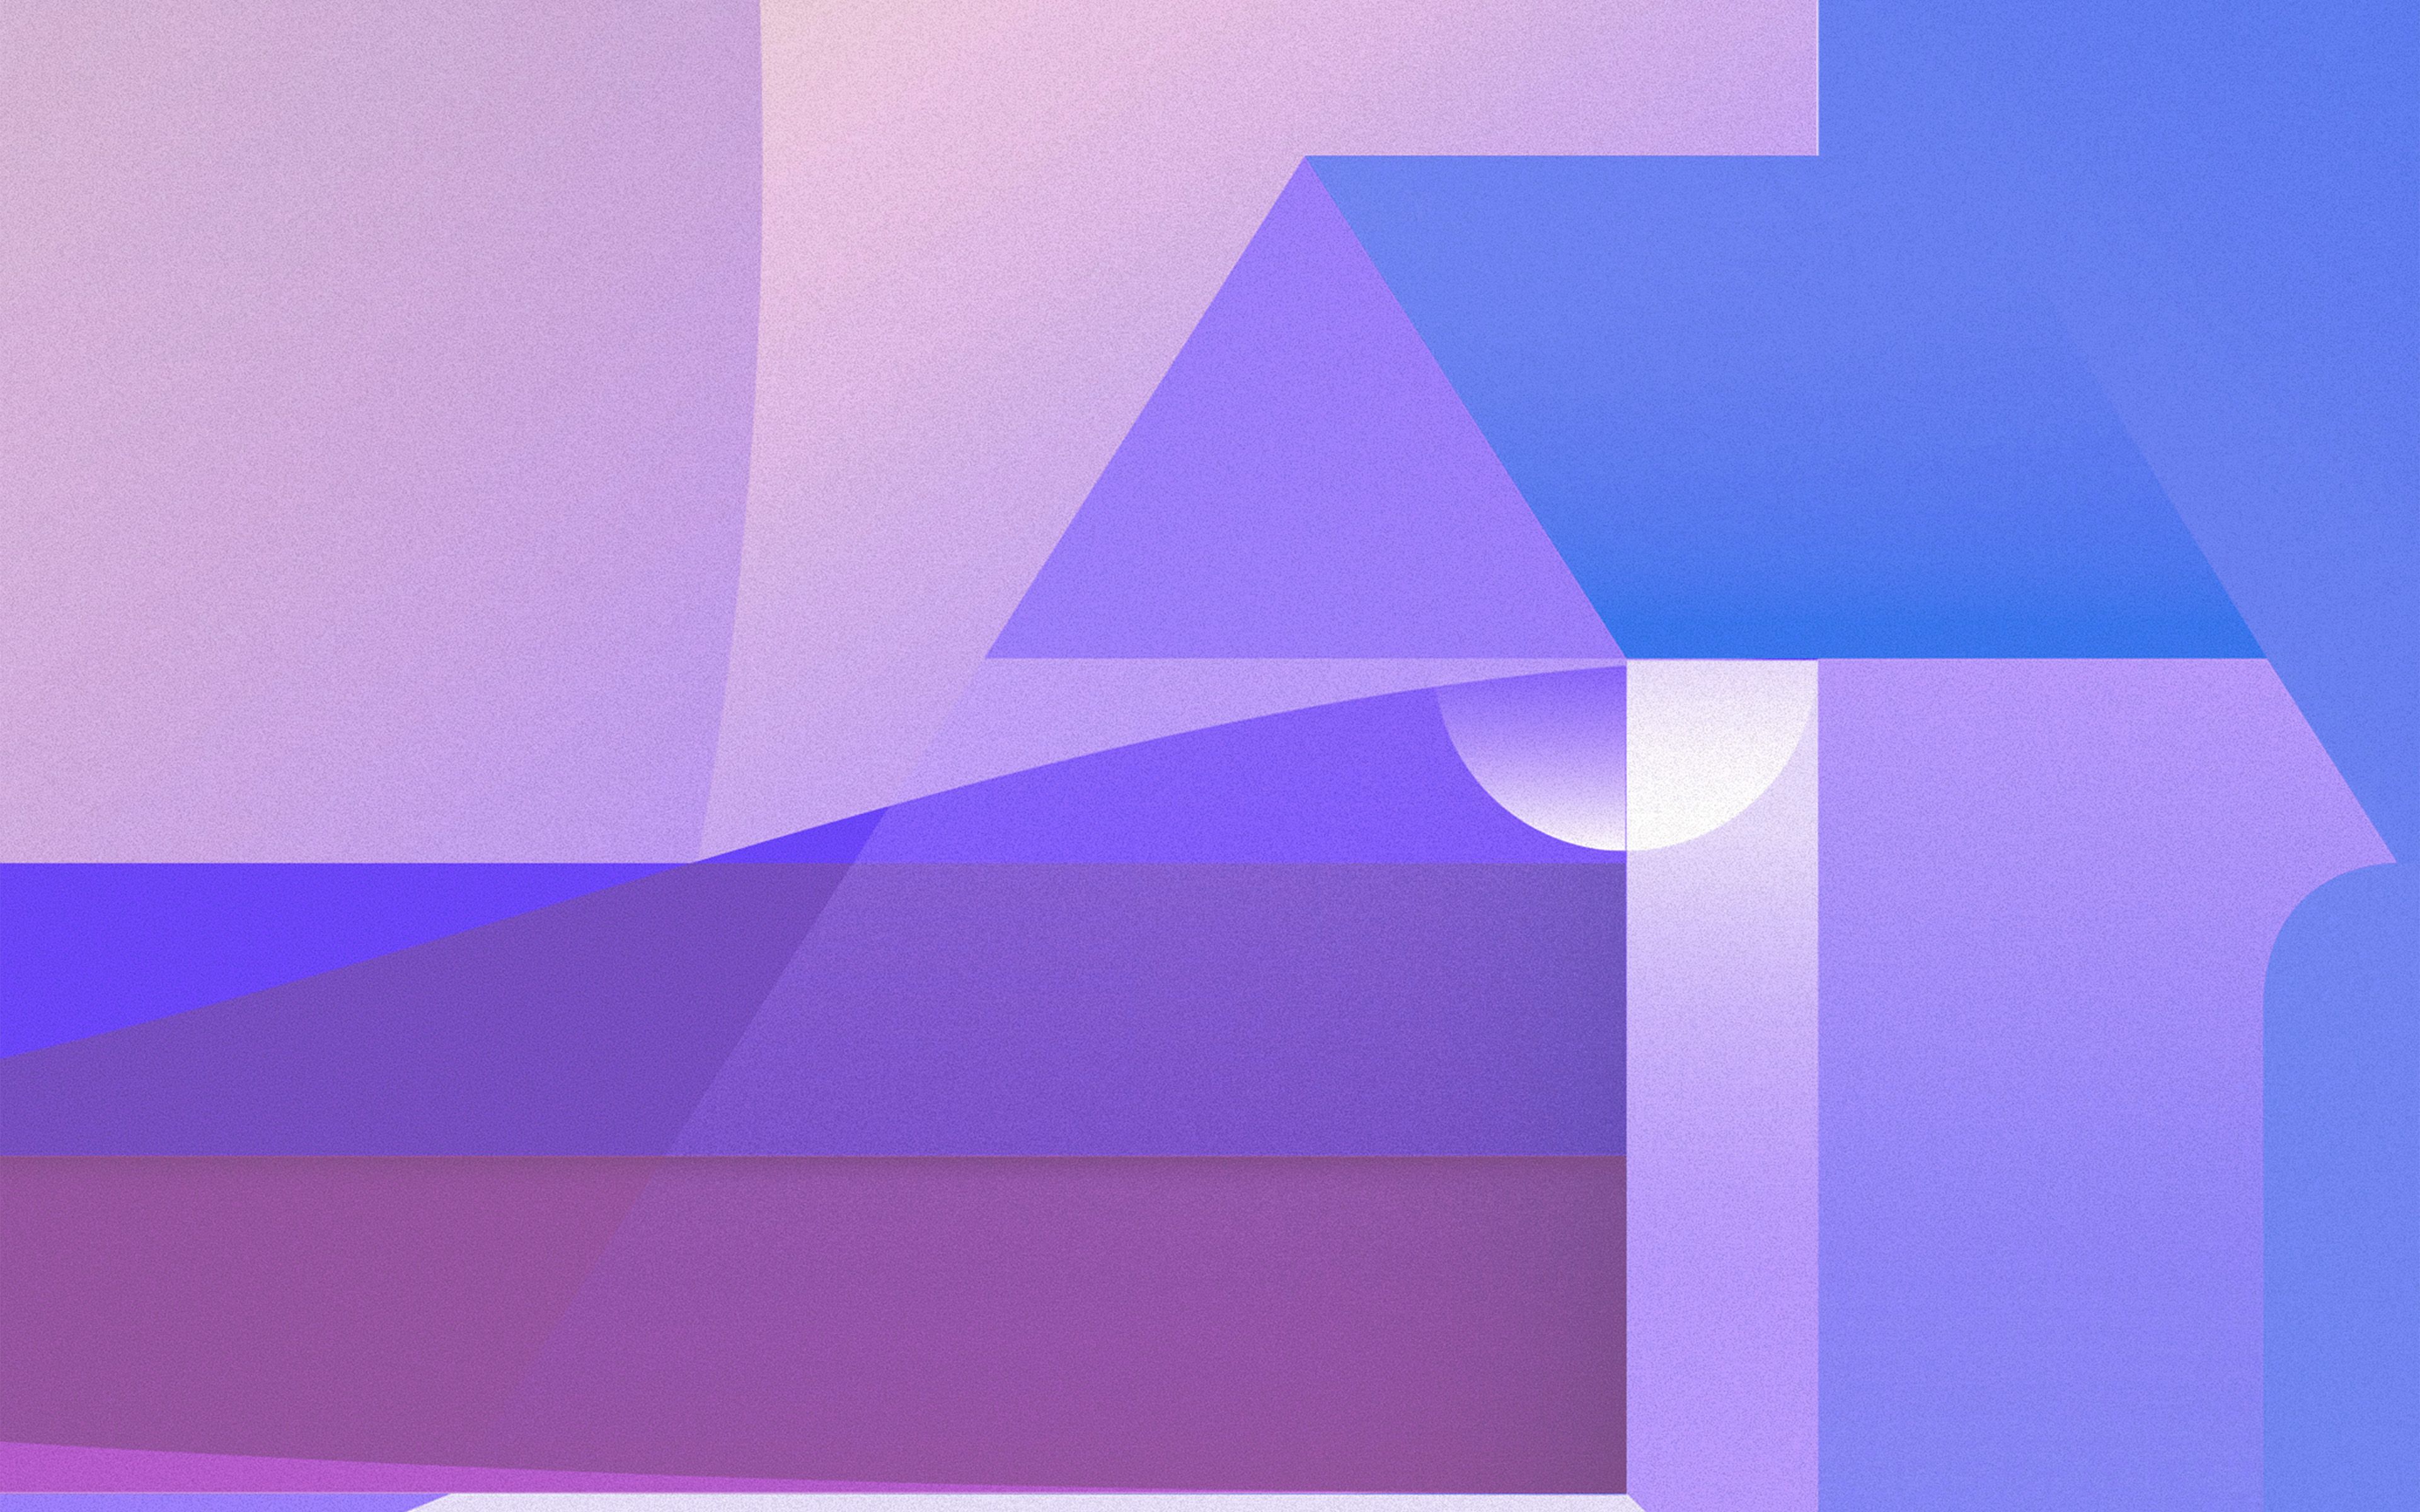 A purple and blue graphic with overlapping shapes - Pastel minimalist